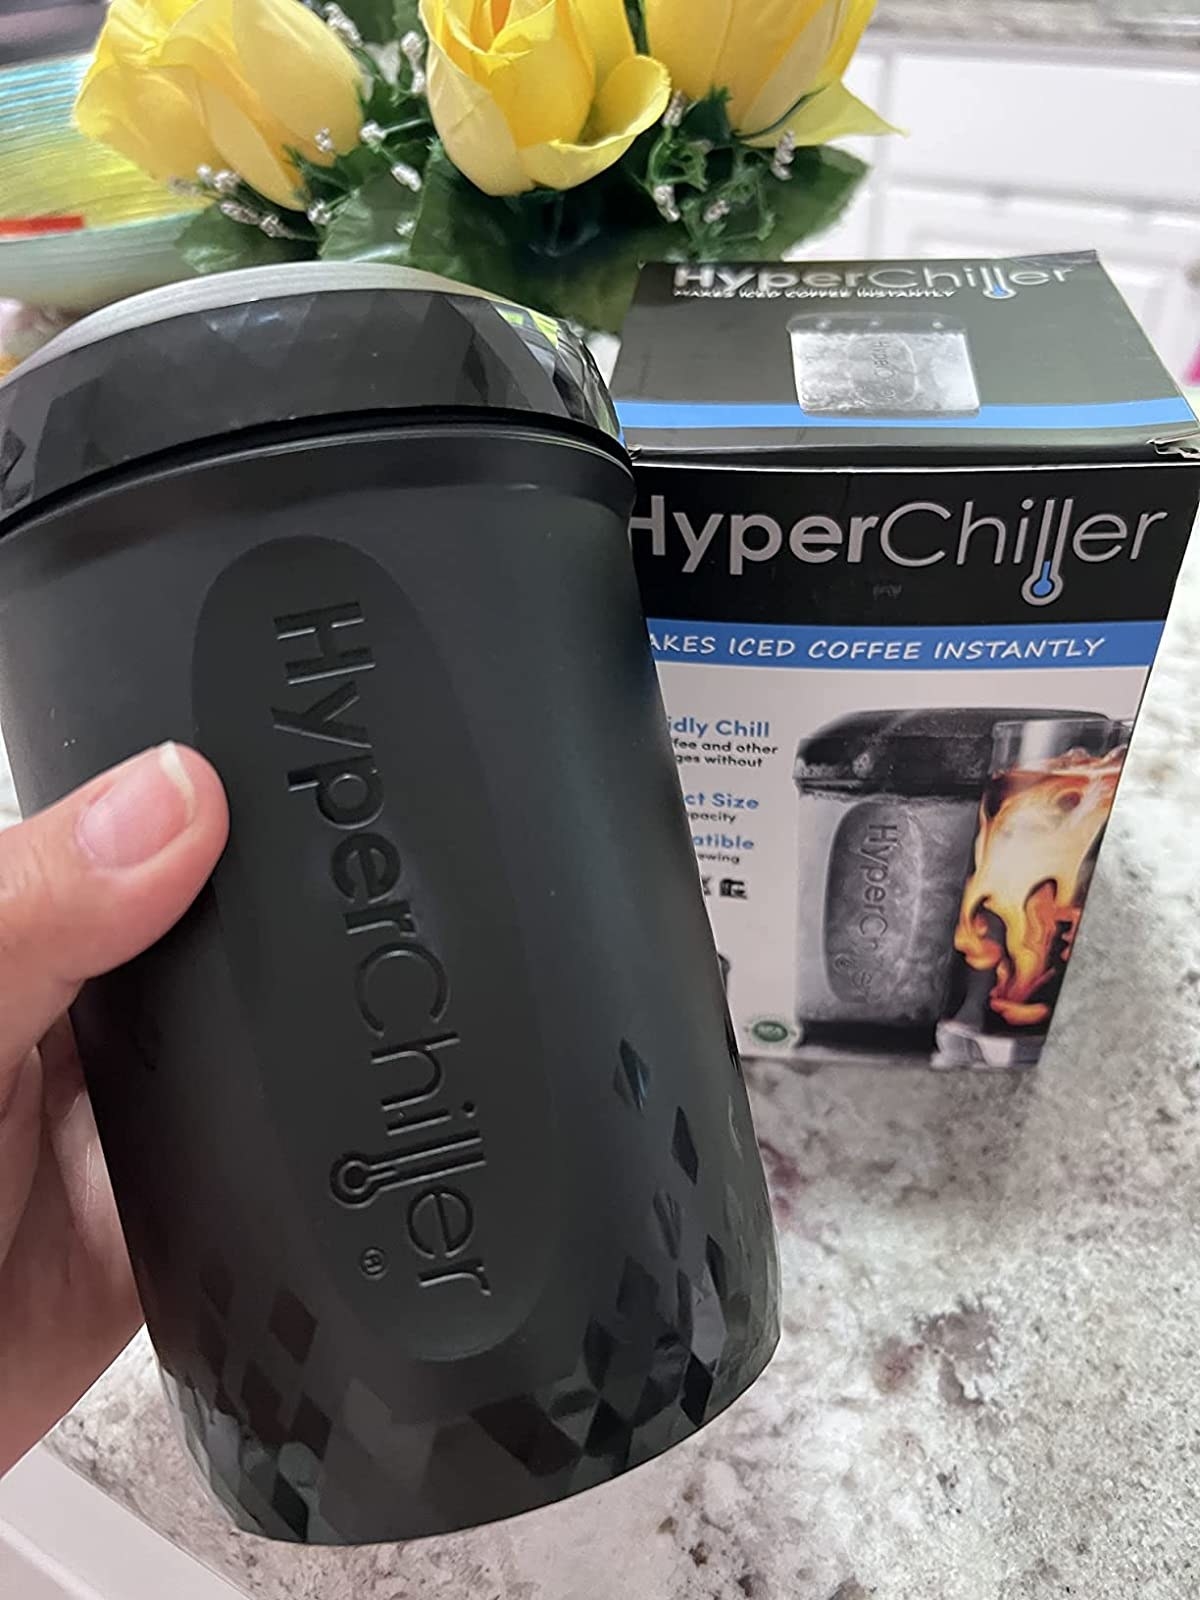 This HyperChiller will rapidly cool your drinks for $12